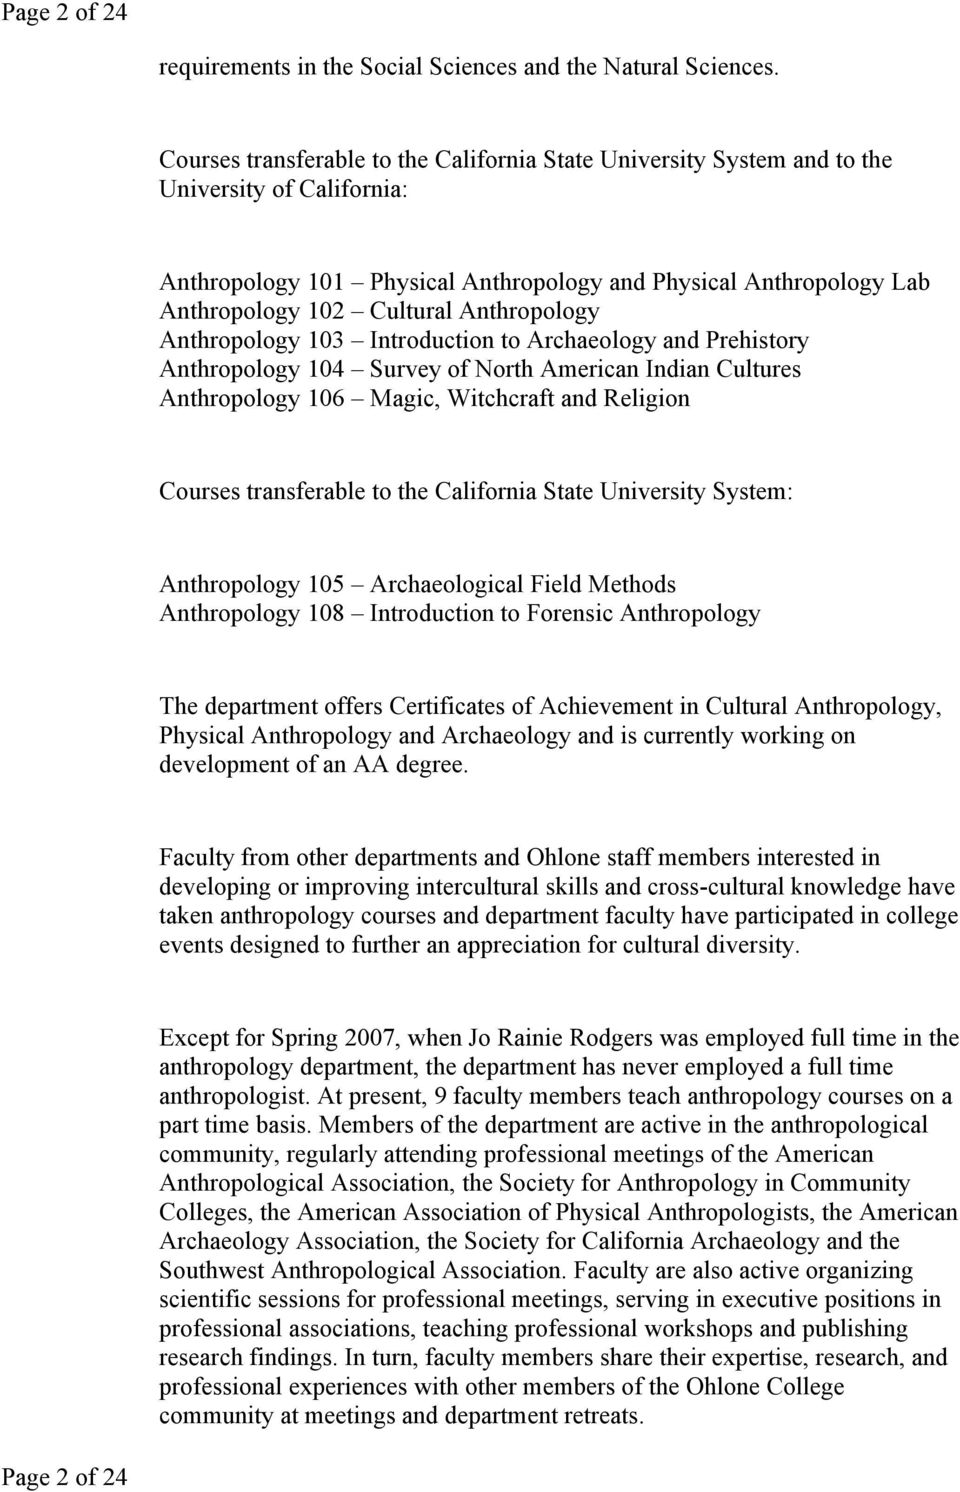 Anthropology Anthropology 103 Introduction to Archaeology and Prehistory Anthropology 104 Survey of North American Indian Cultures Anthropology 106 Magic, Witchcraft and Religion Courses transferable